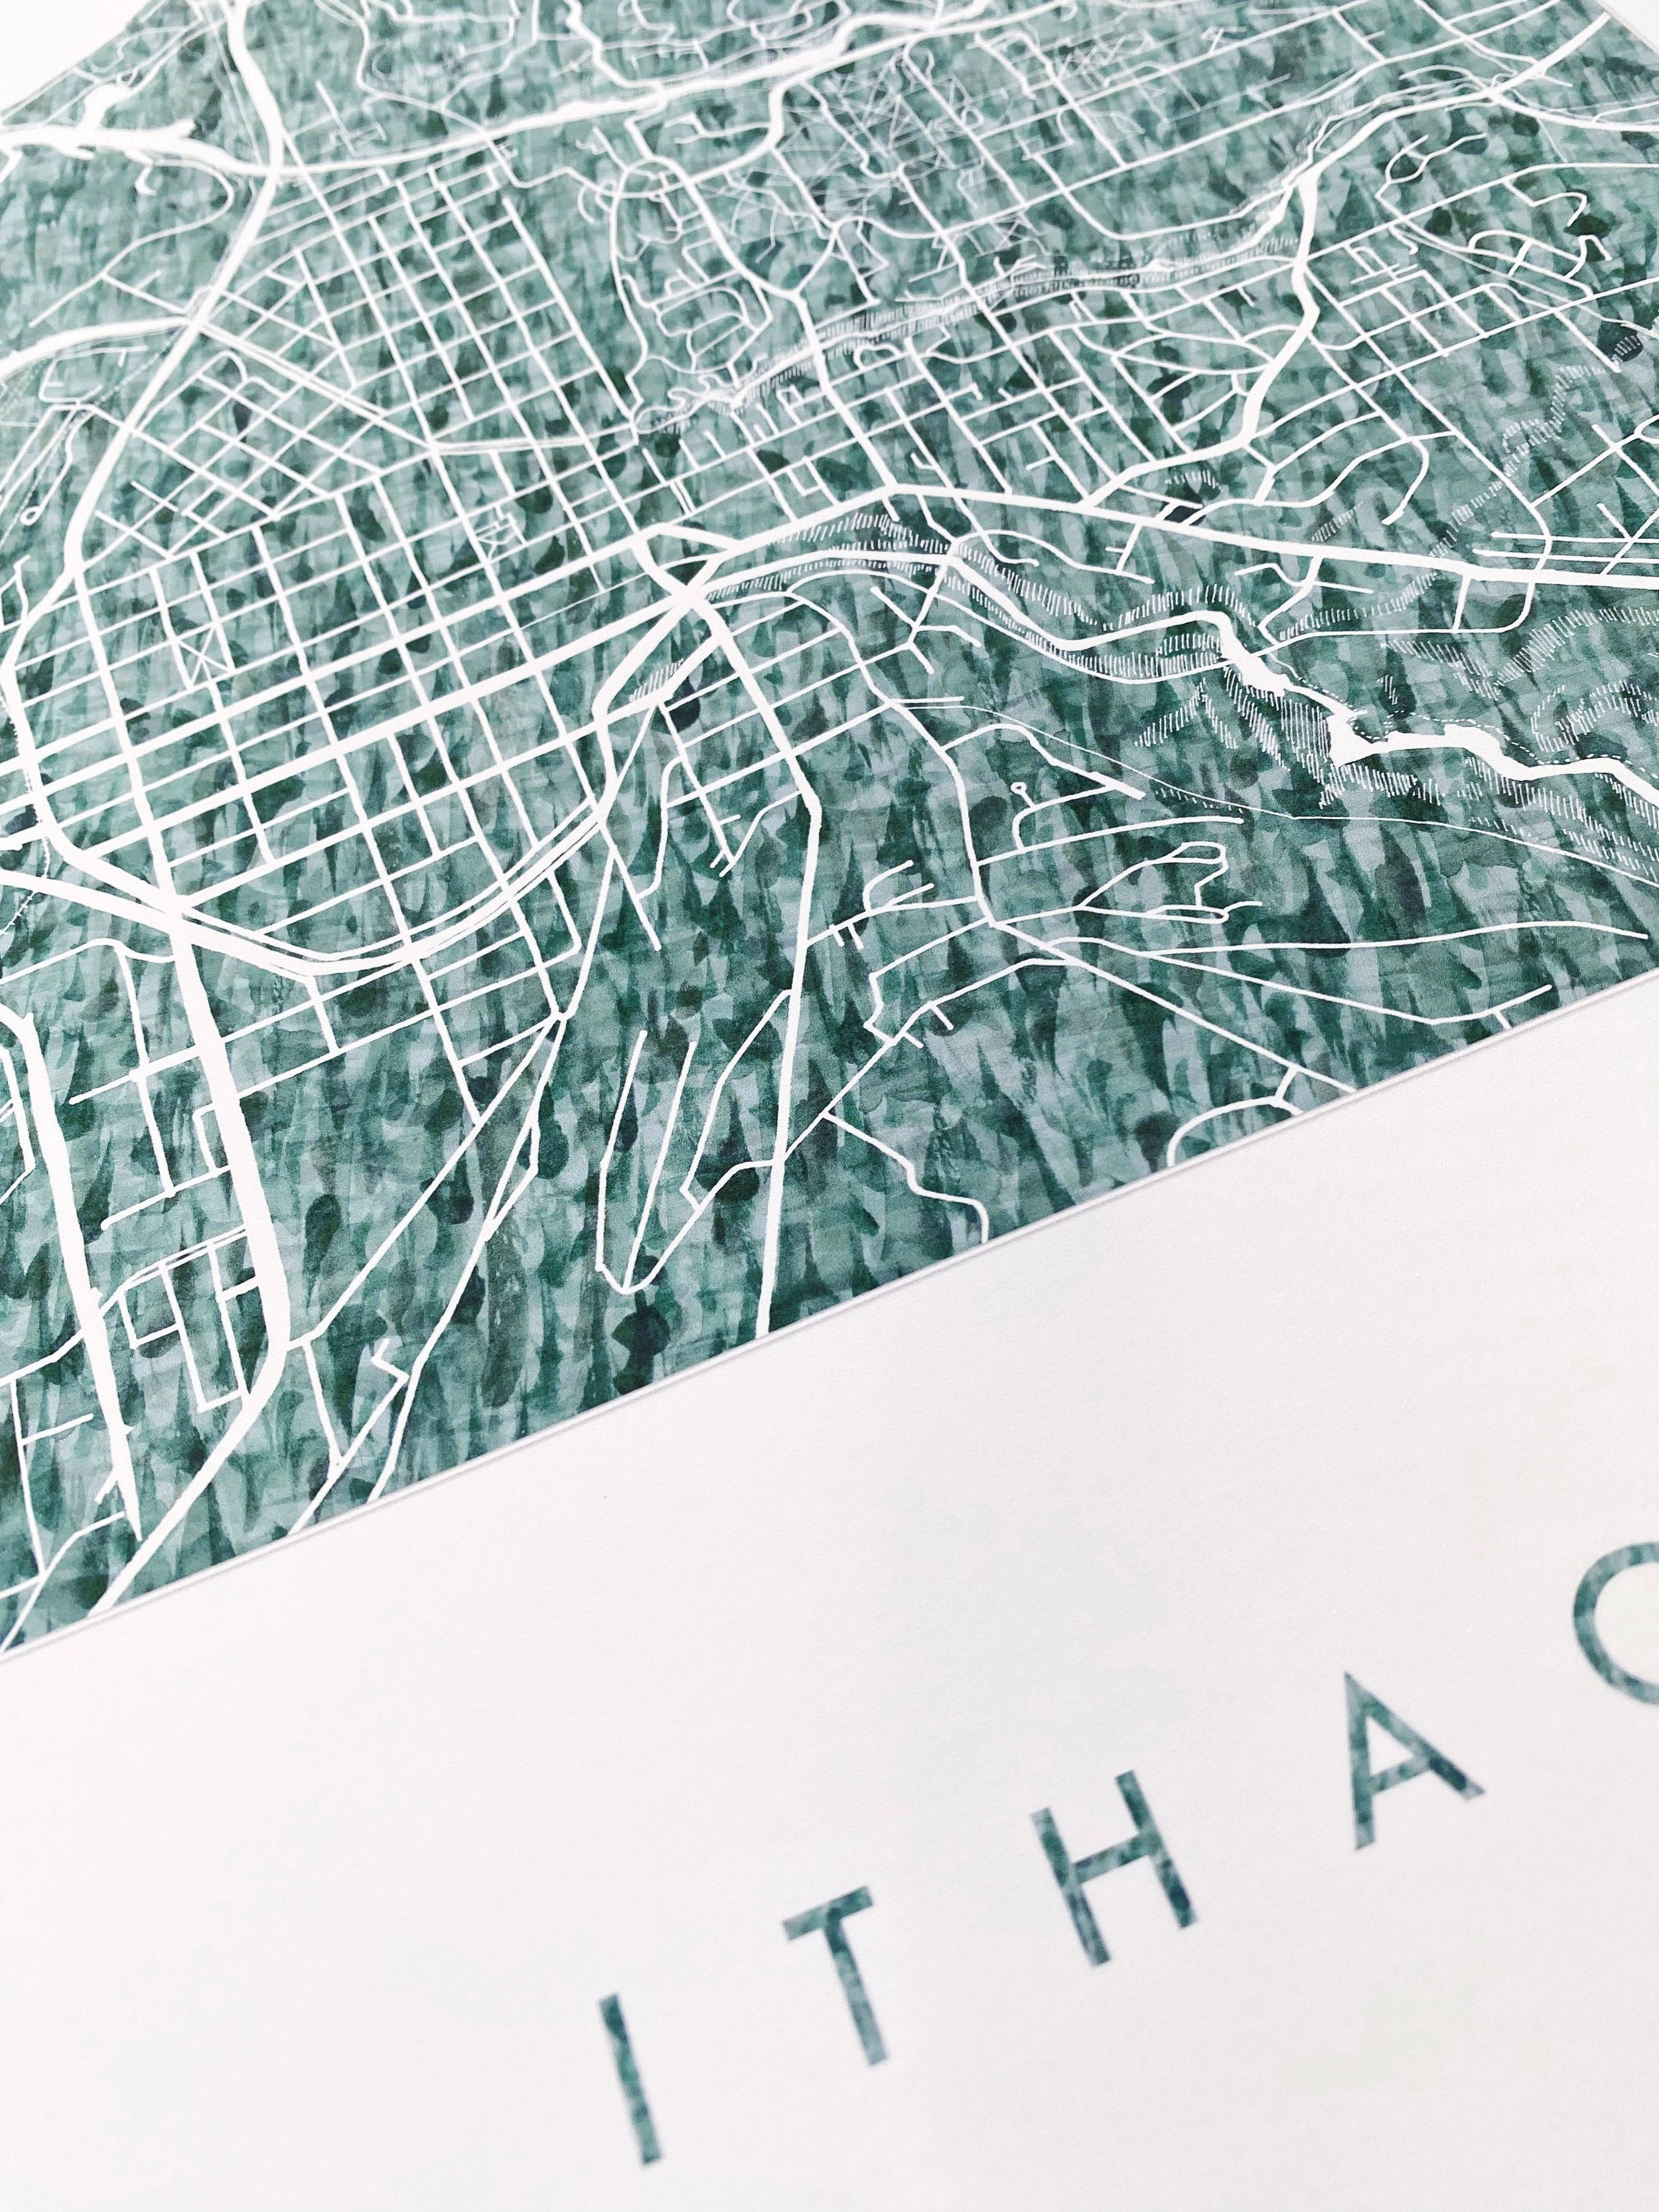 ITHACA New York Topgraphical Watercolor Map: PRINT